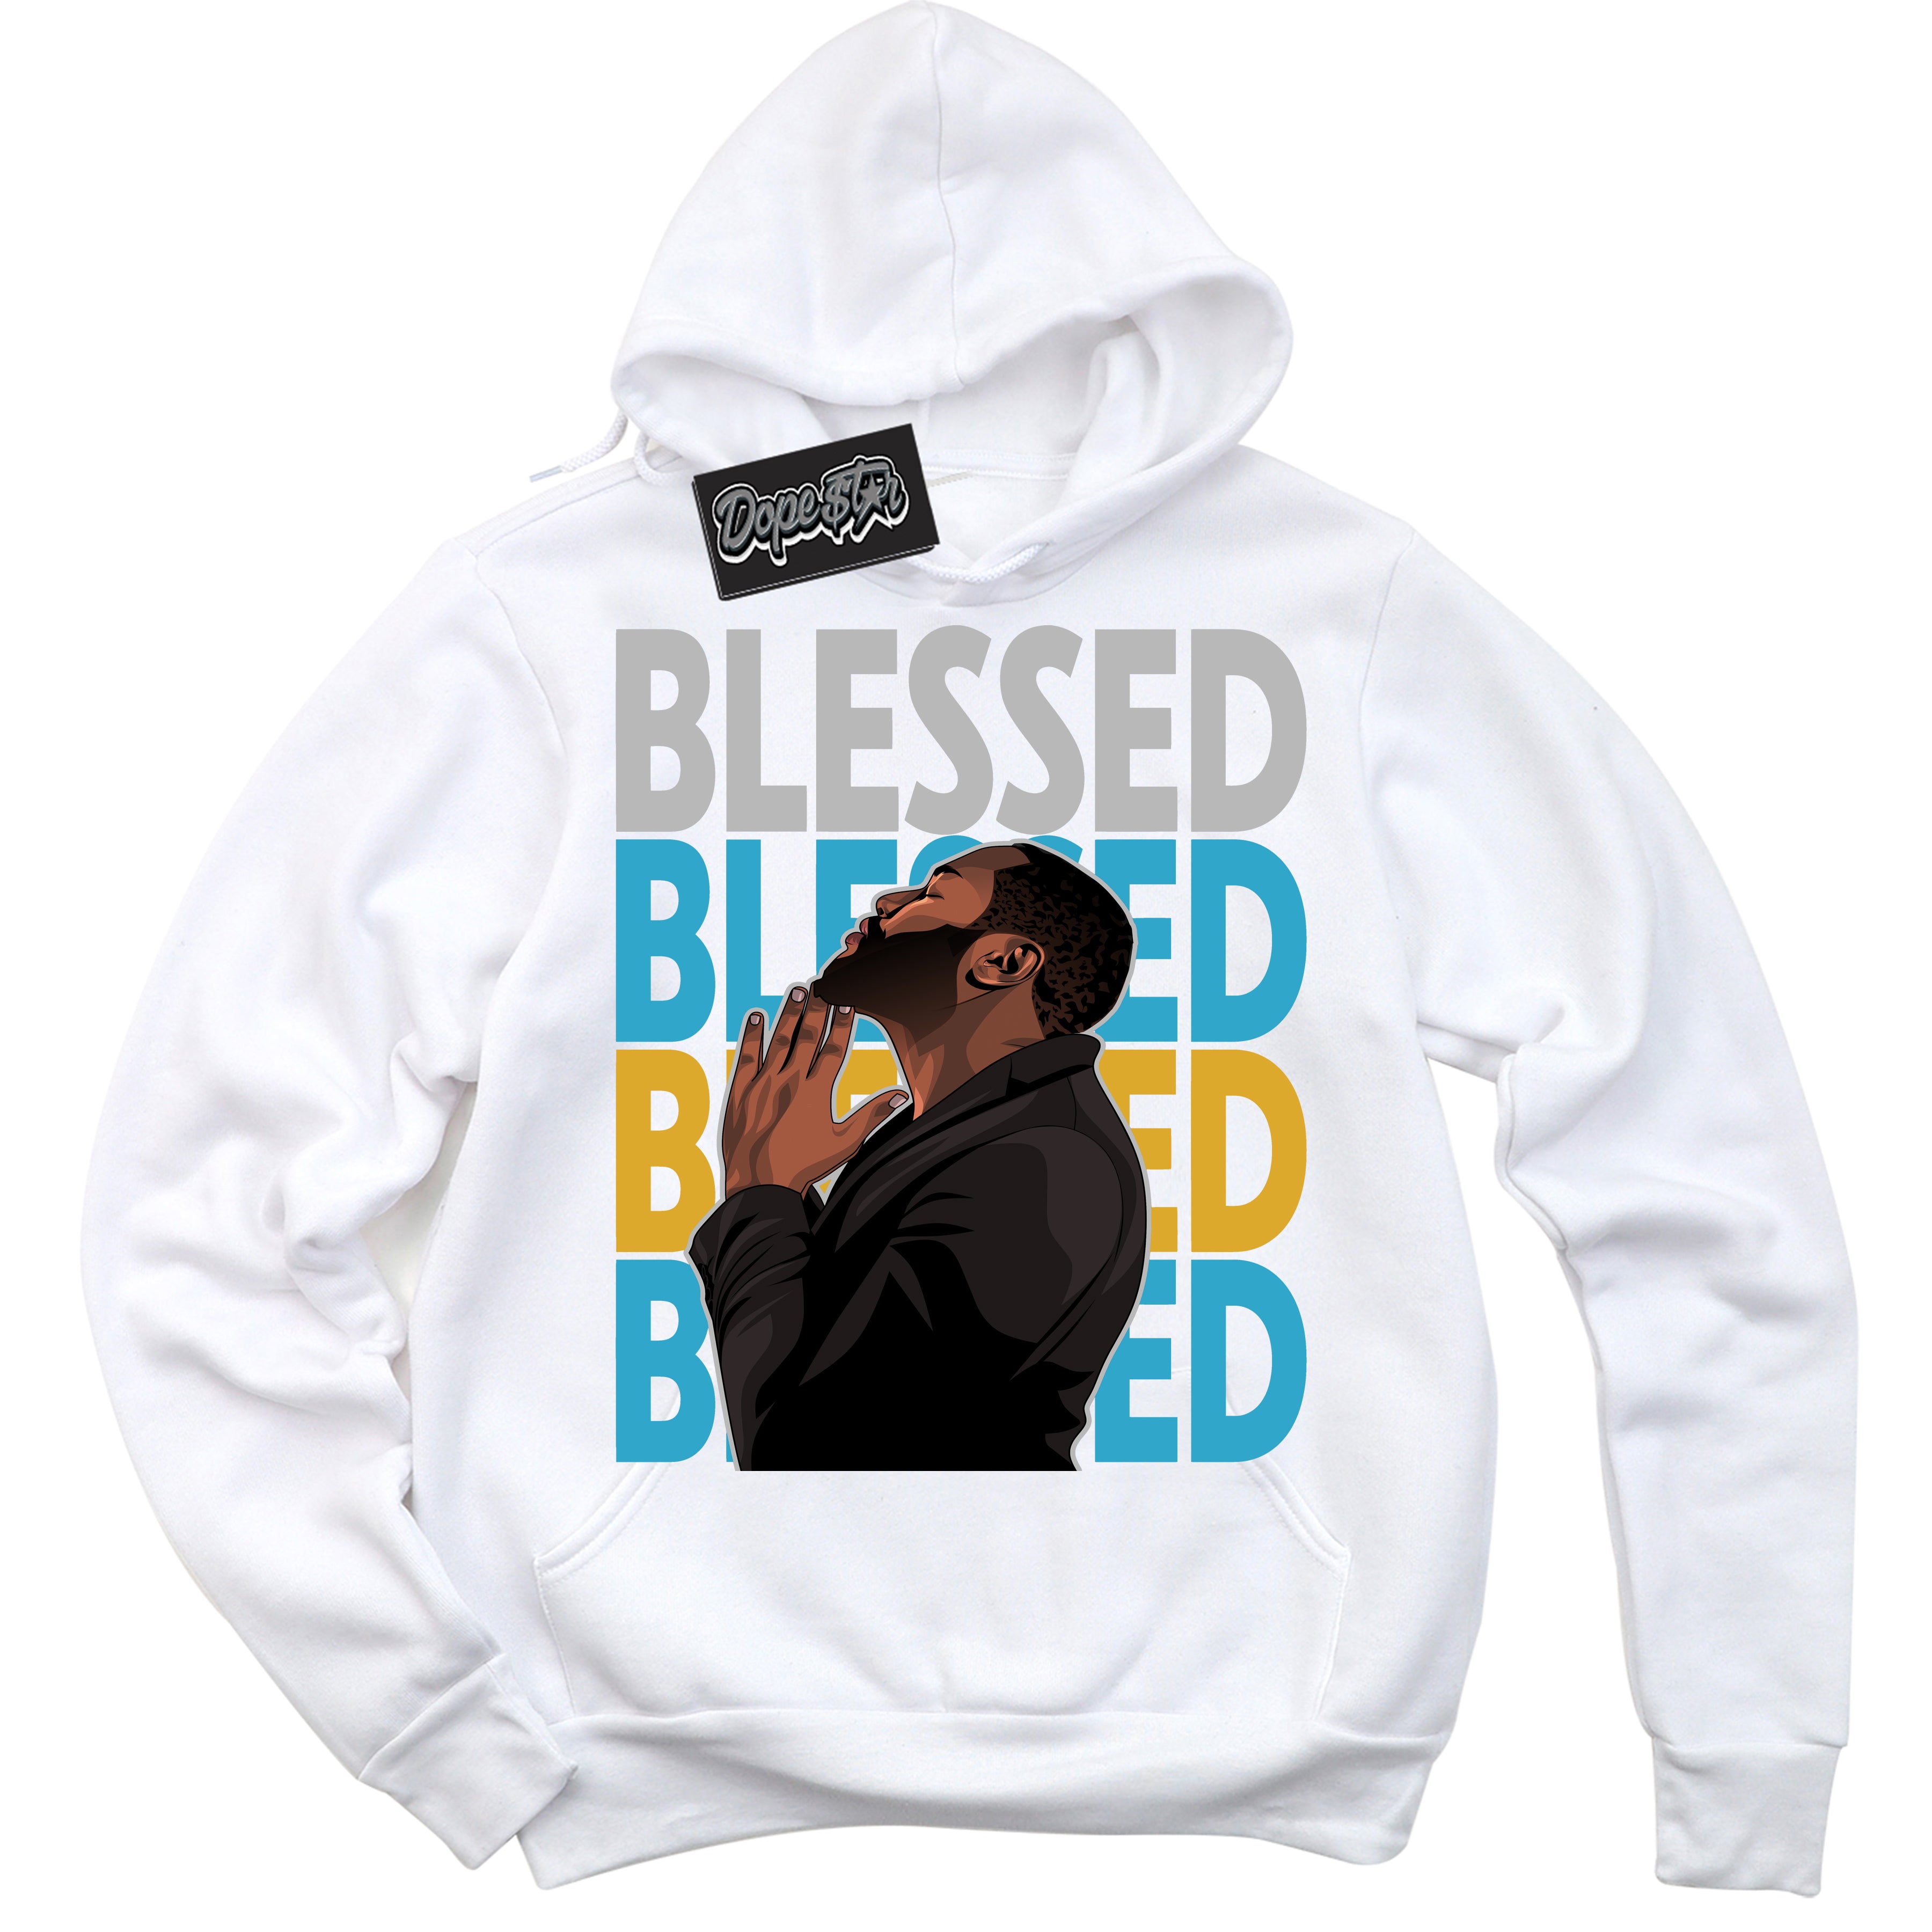 Cool White Graphic Hoodie with “ God Blessed“ print, that perfectly matches Air Jordan 5 AQUA  sneakers